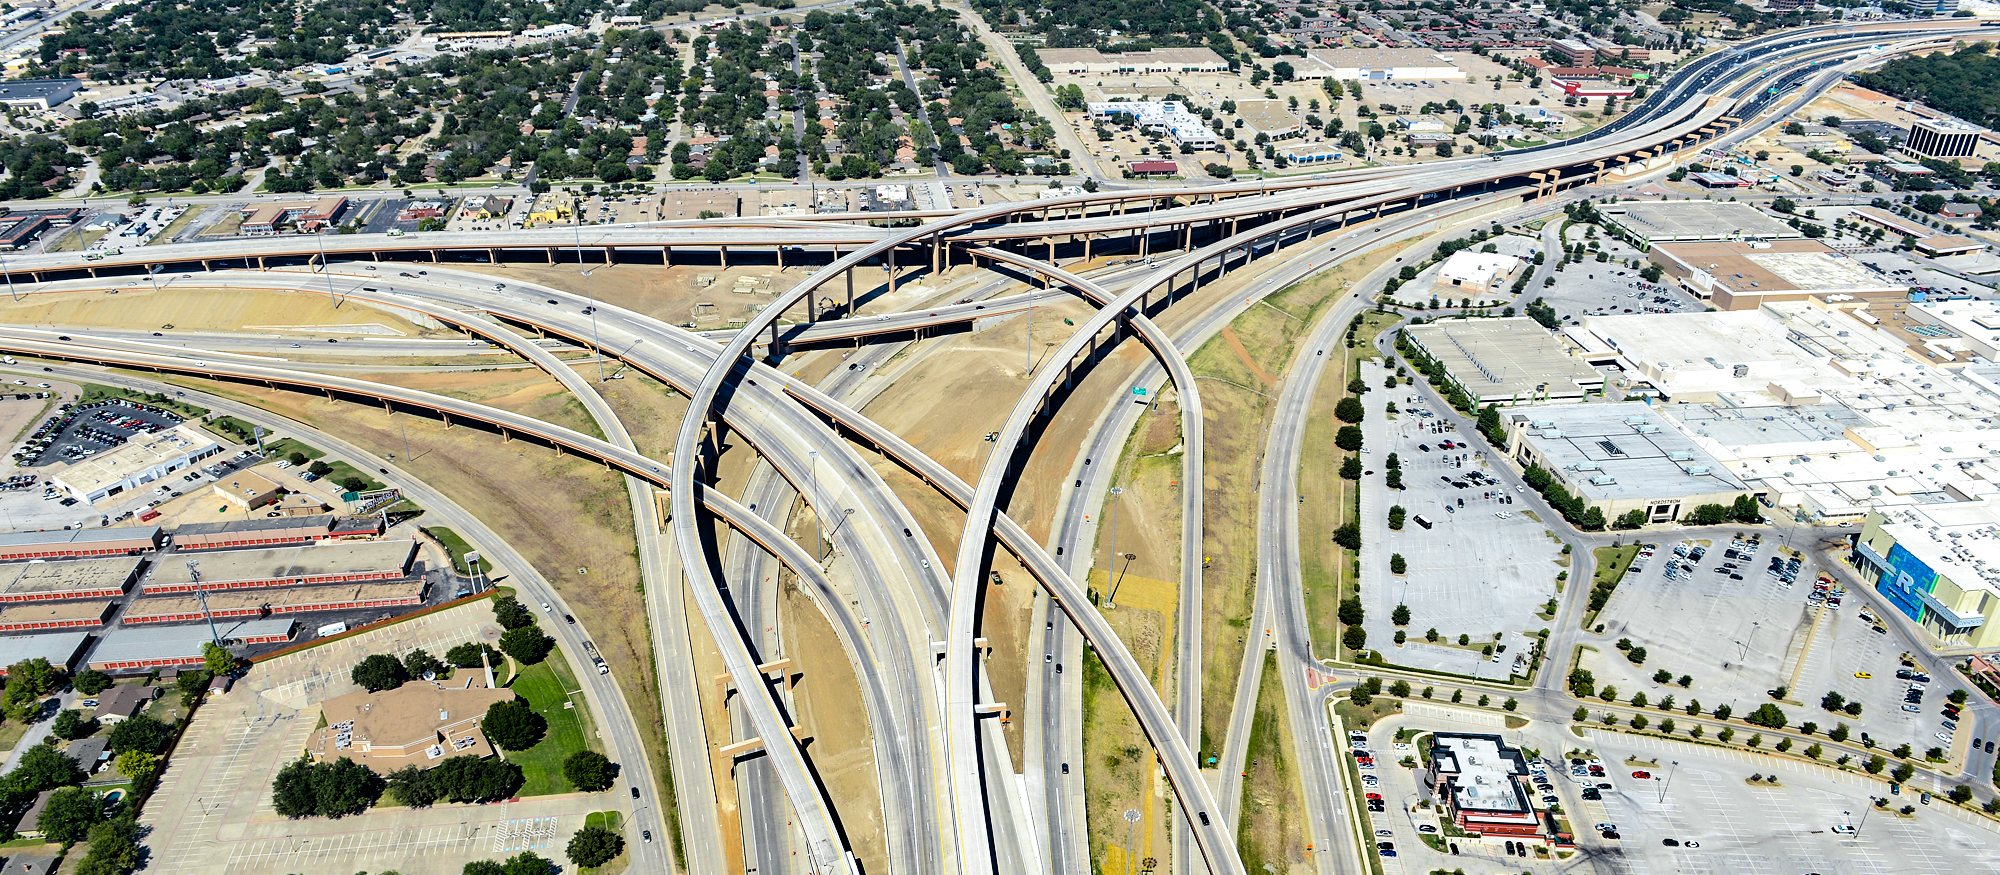 Aerial view of Highway interchanges